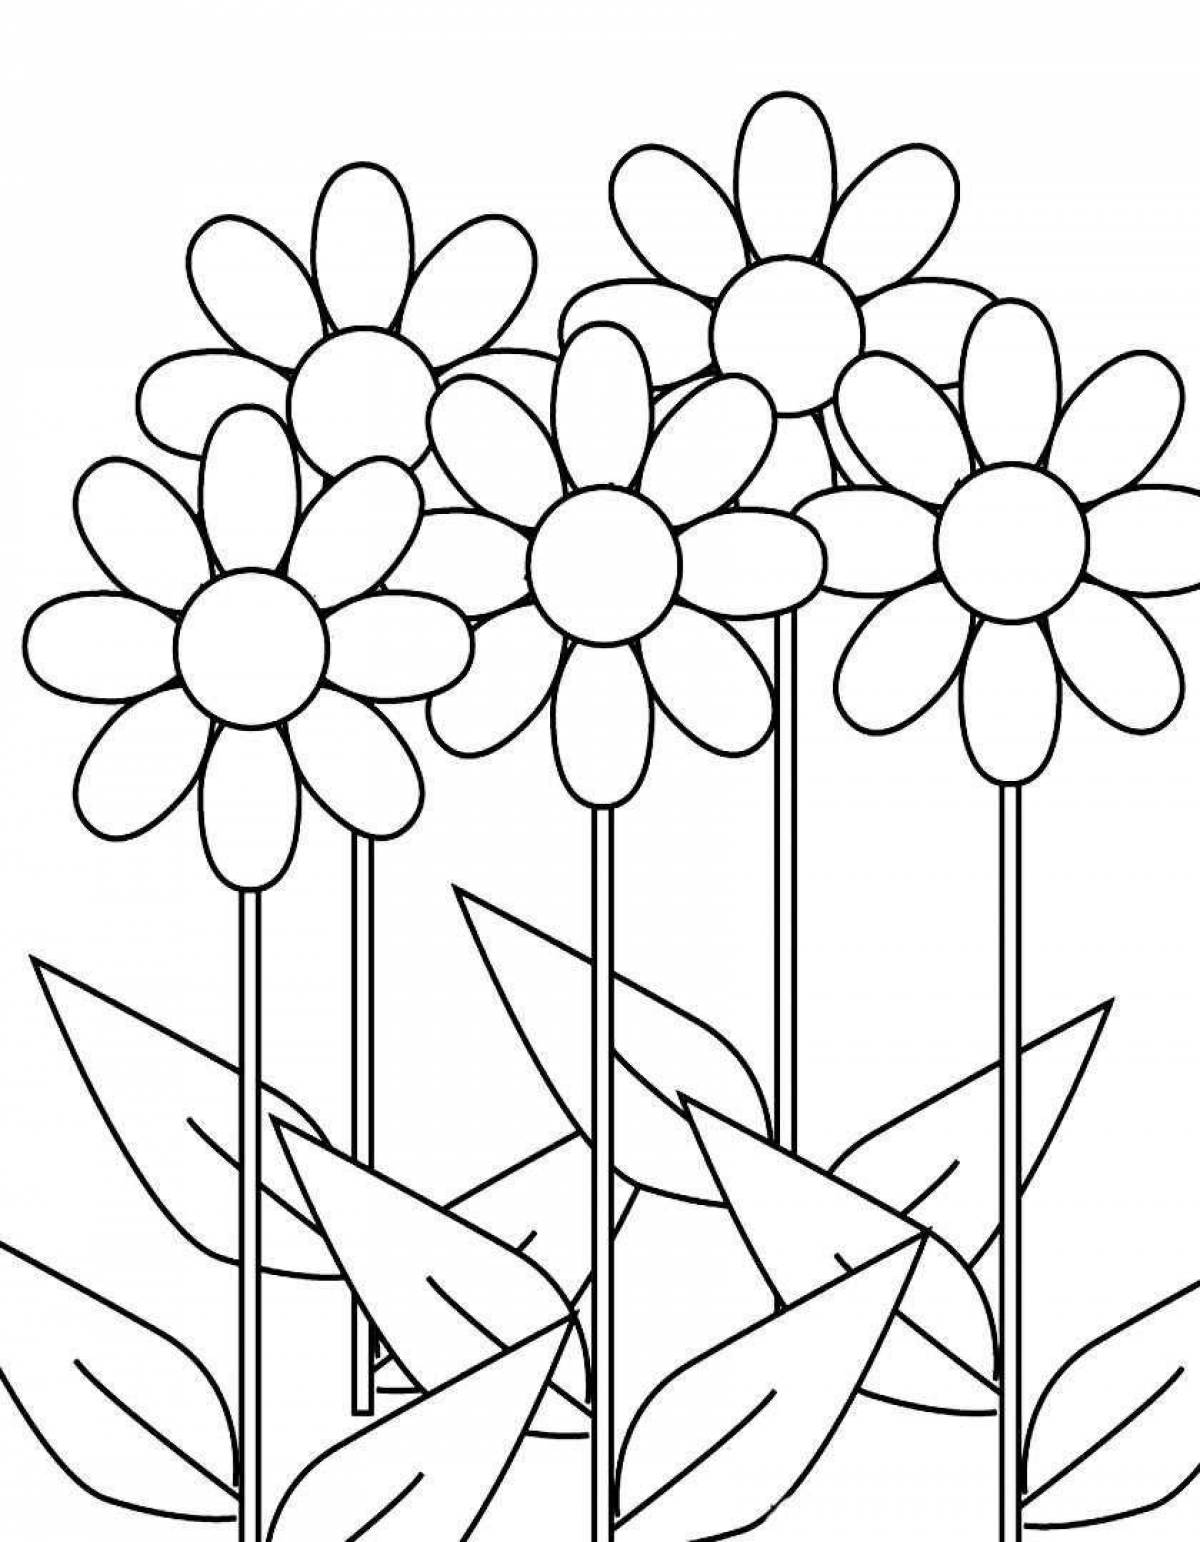 Fun coloring flower picture for kids